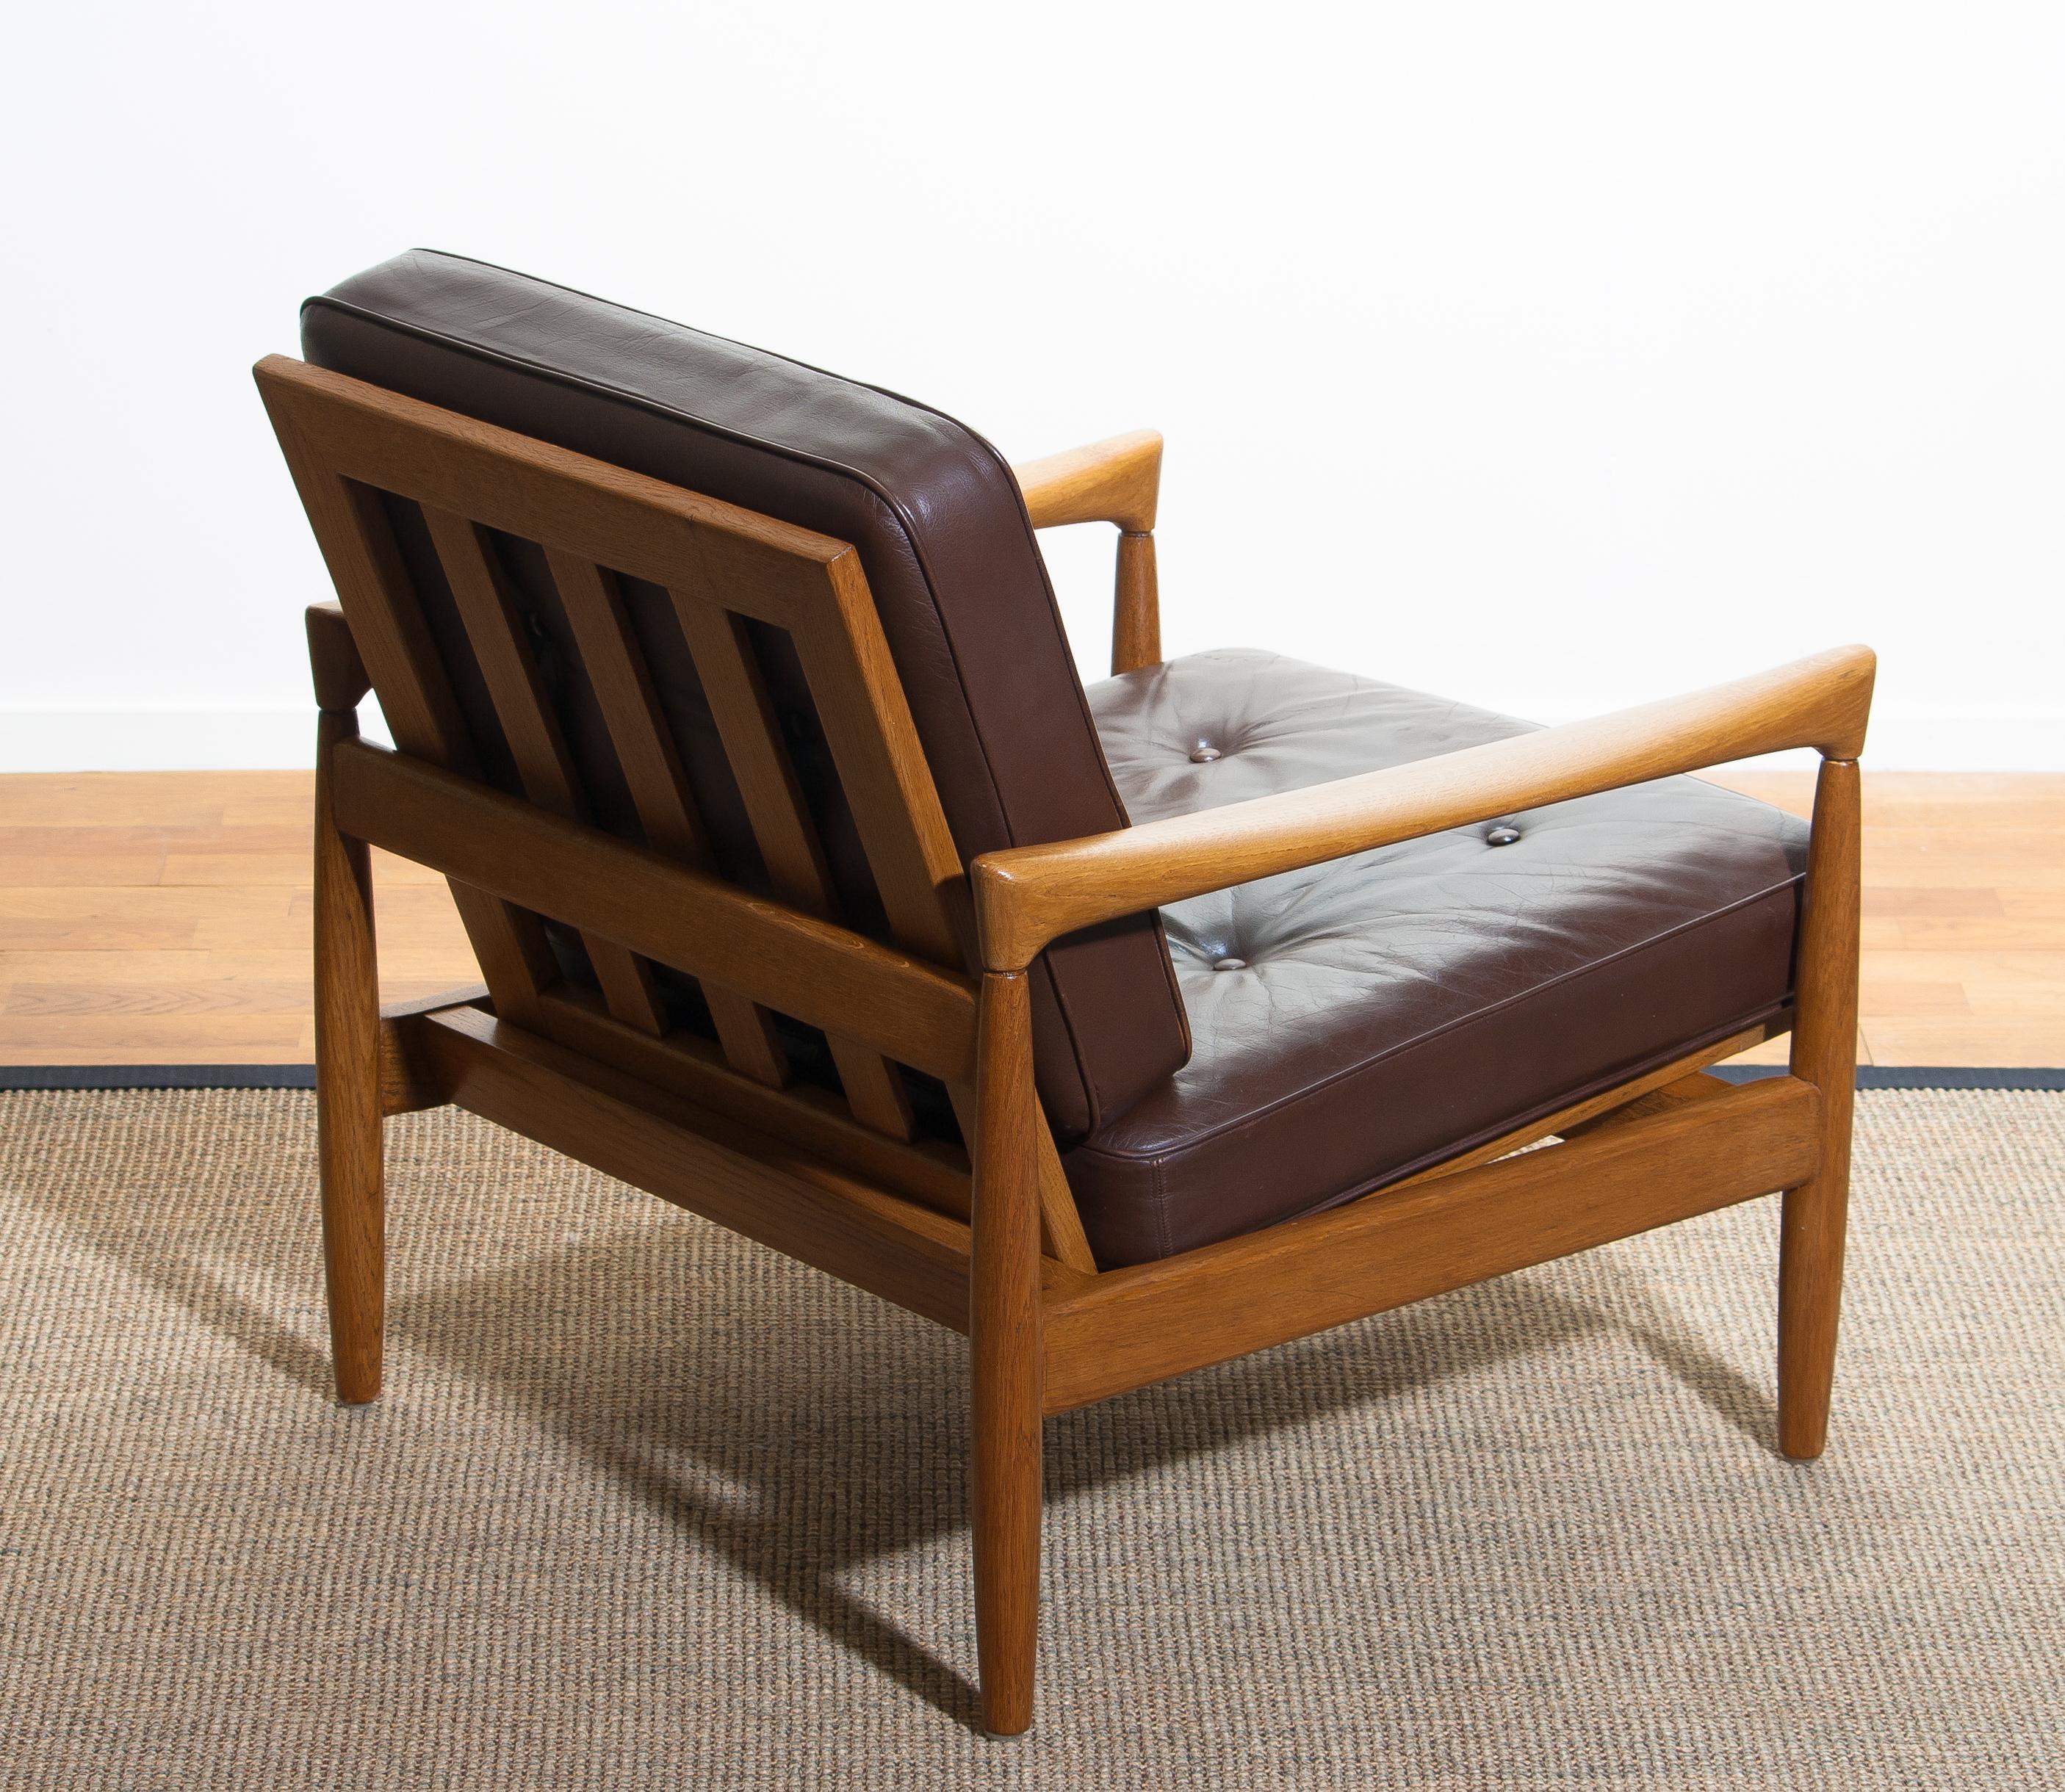 1960s, Oak with Brown Leather Lounge Chair by Erik Wörtz for Bröderna Anderssons 1